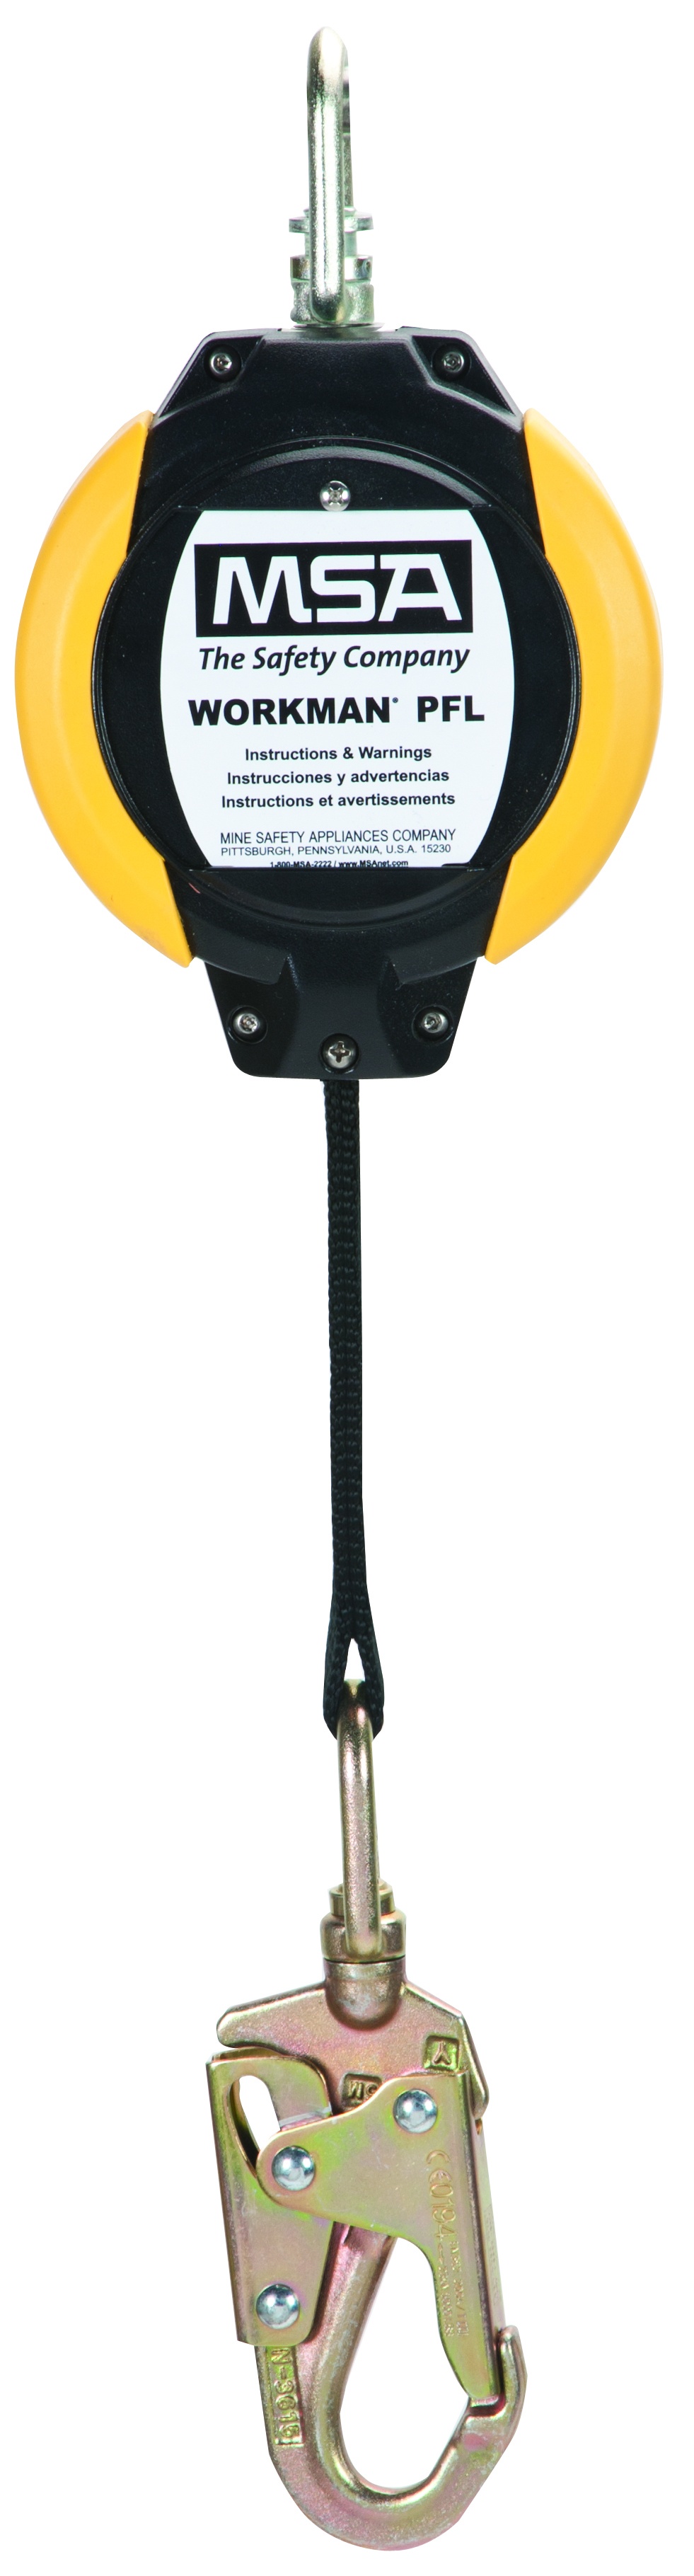 MSA Workman 12 FT Web Personal Fall Limiter from Columbia Safety